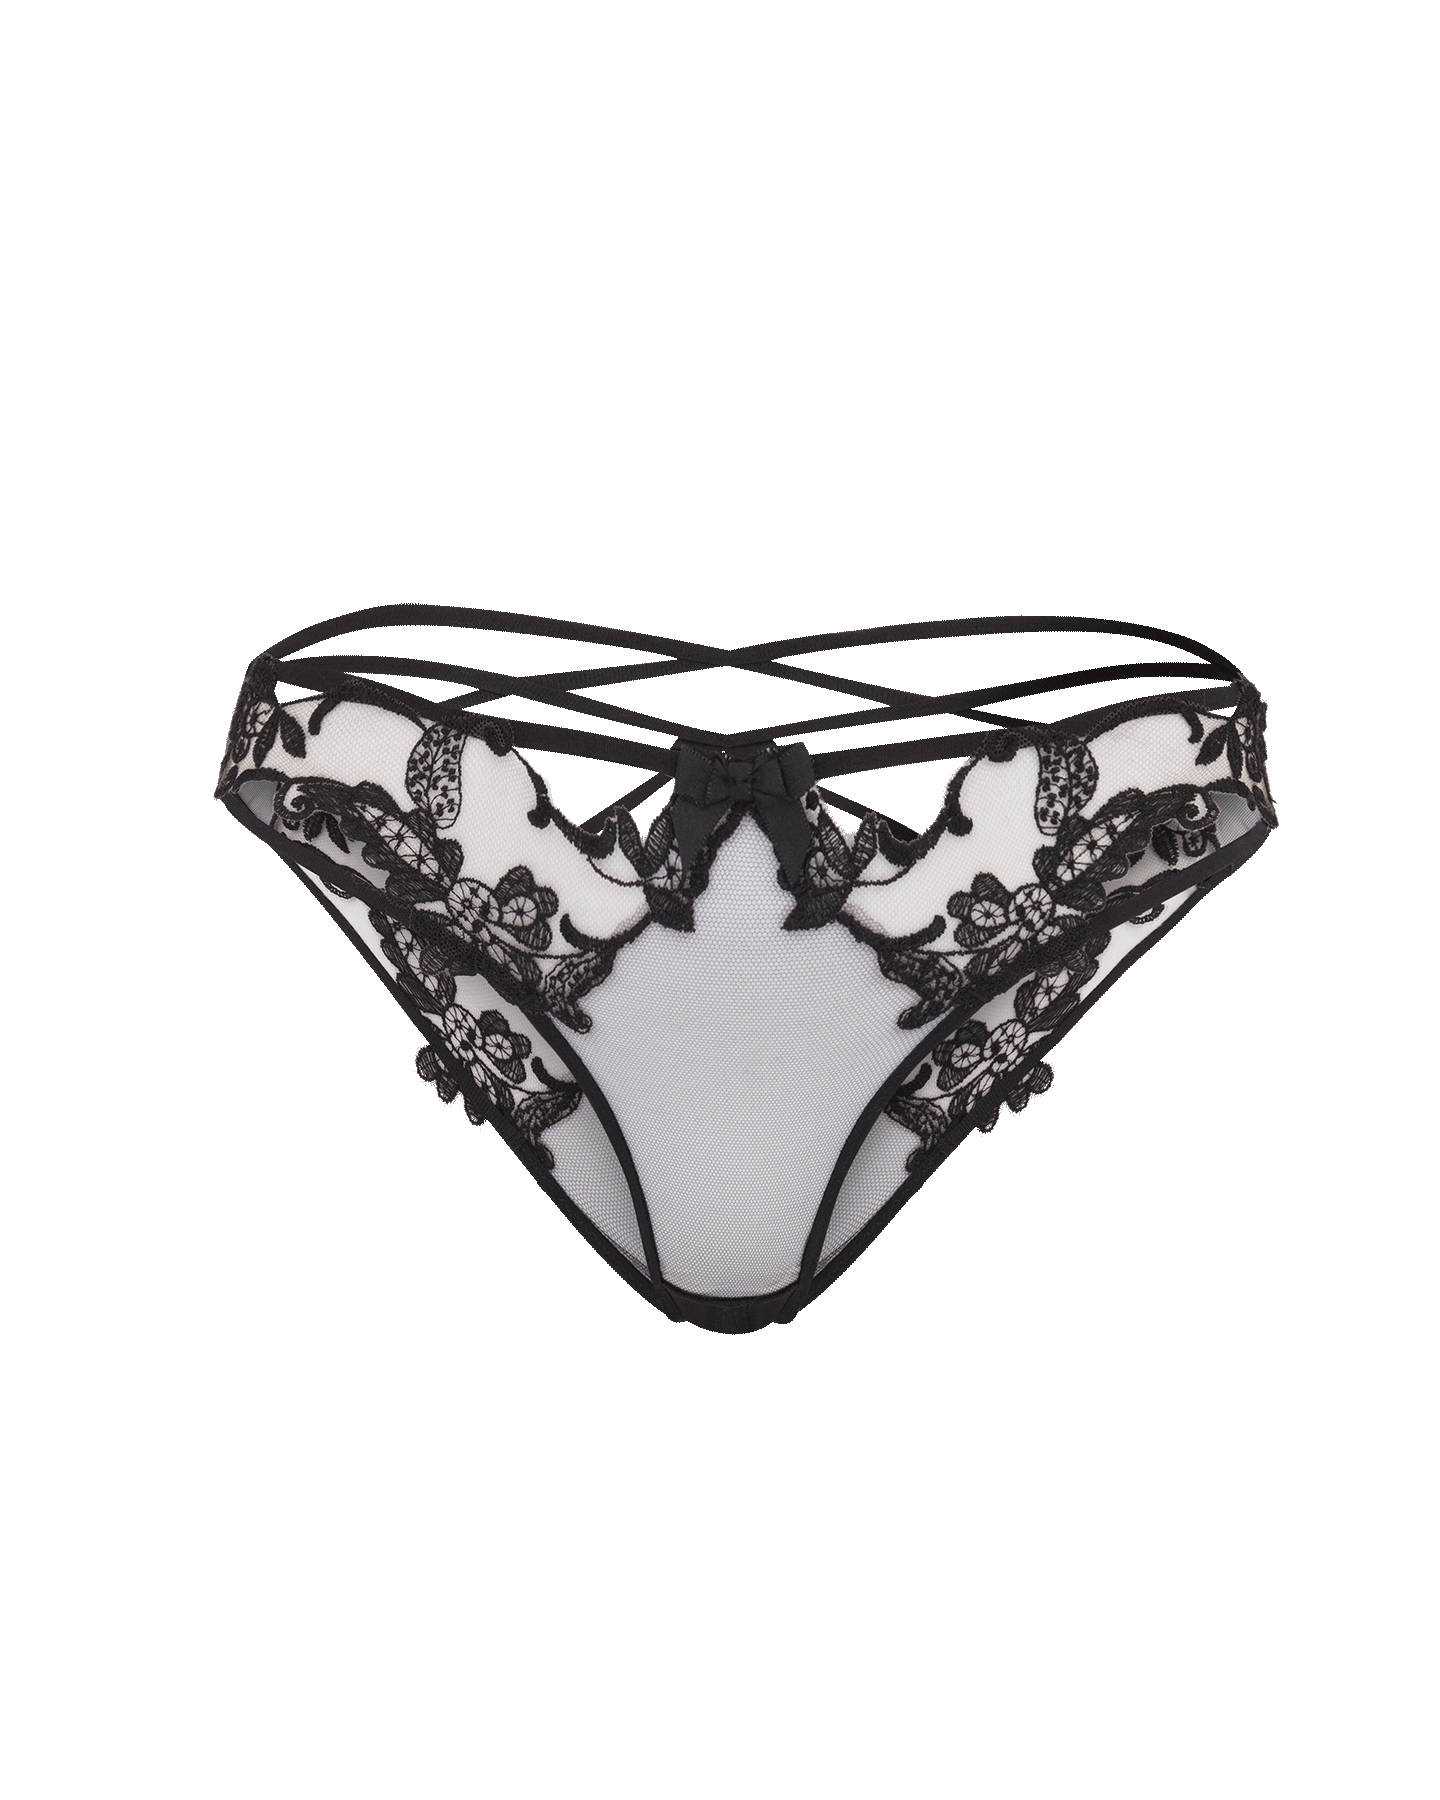 Mirabelle Ouvert in Black | By Agent Provocateur